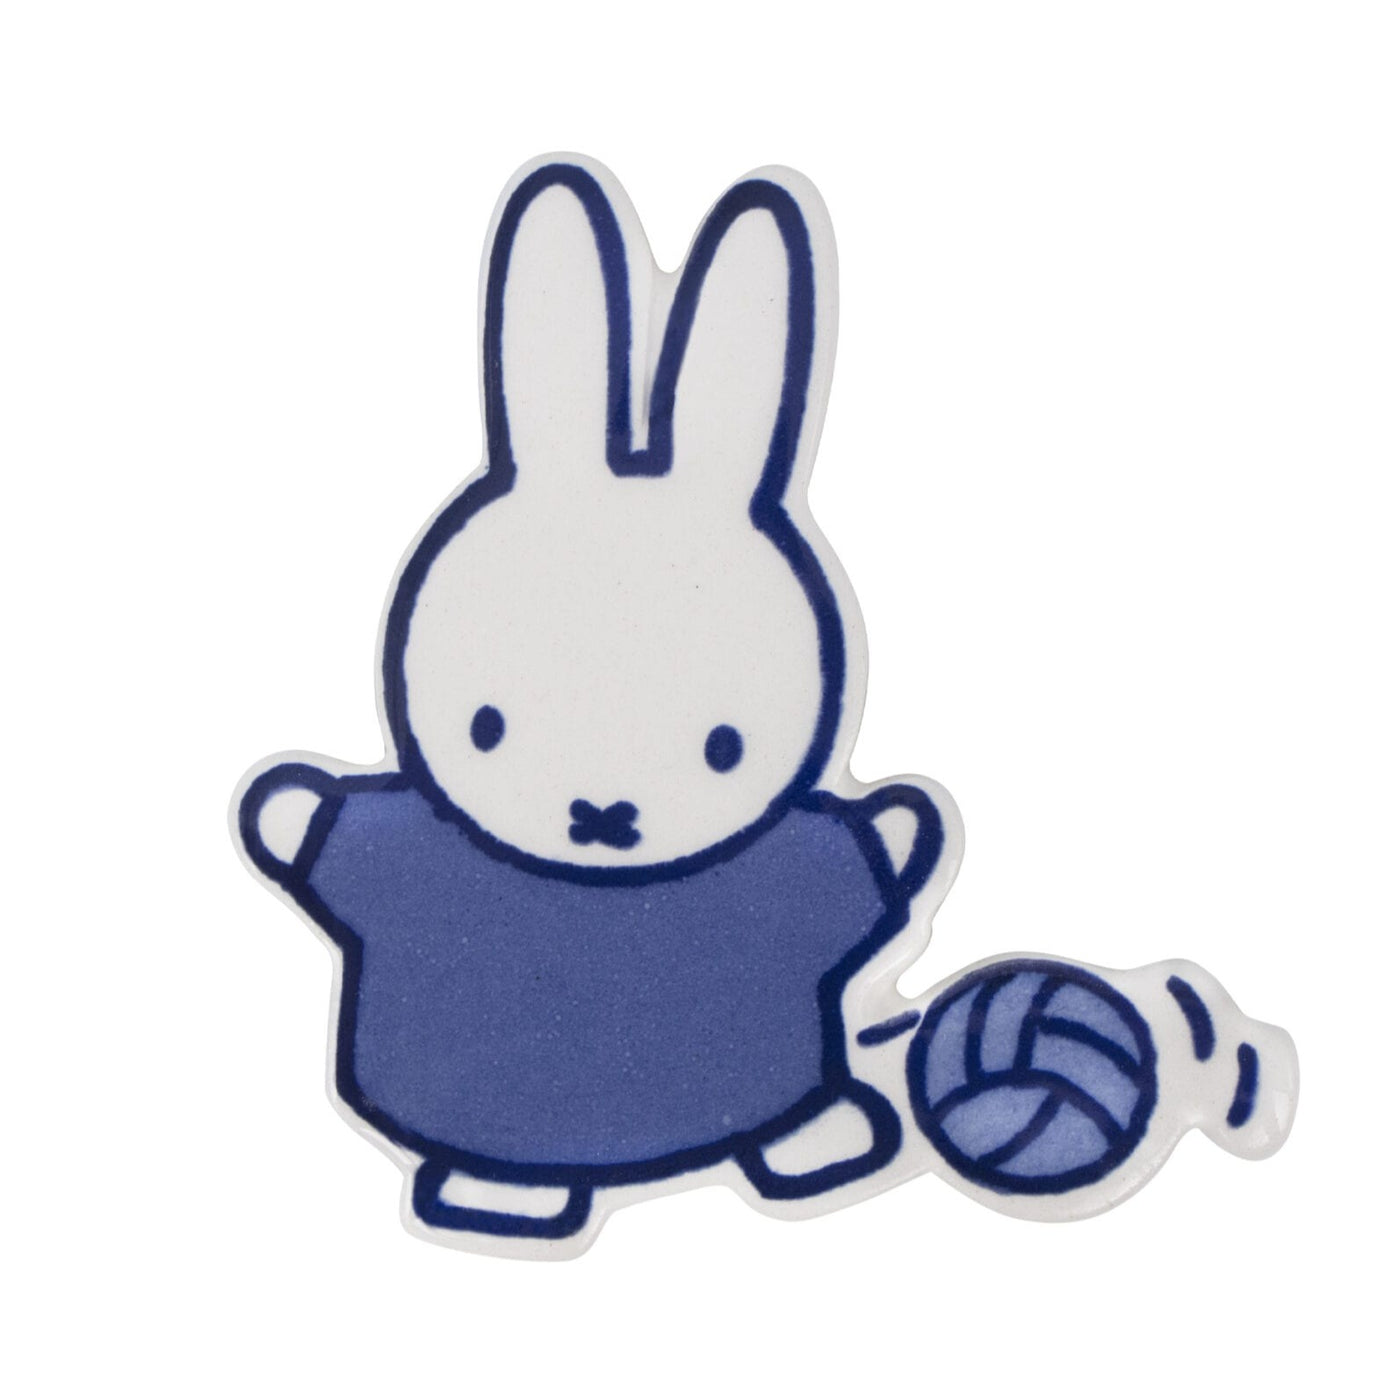 Magnet Miffy Football Delft Blue by Royal Delft